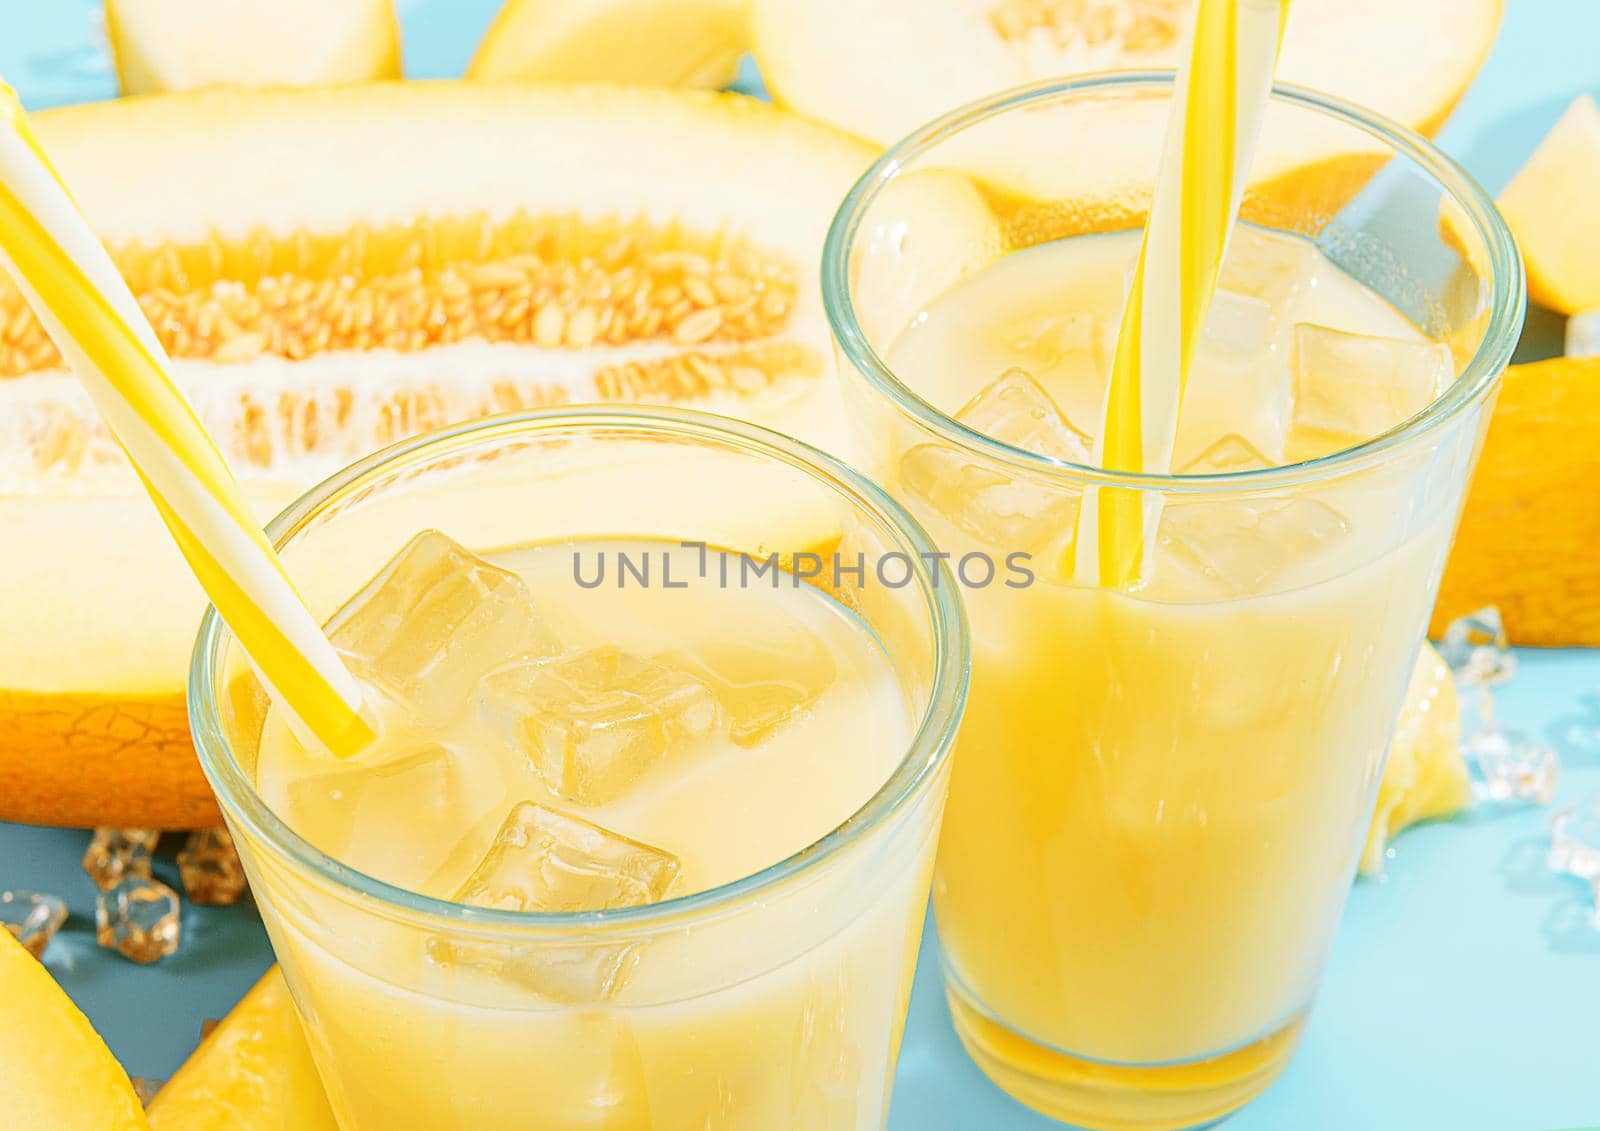 sweet and cold juice from melon in glasses against the background of melon sliced